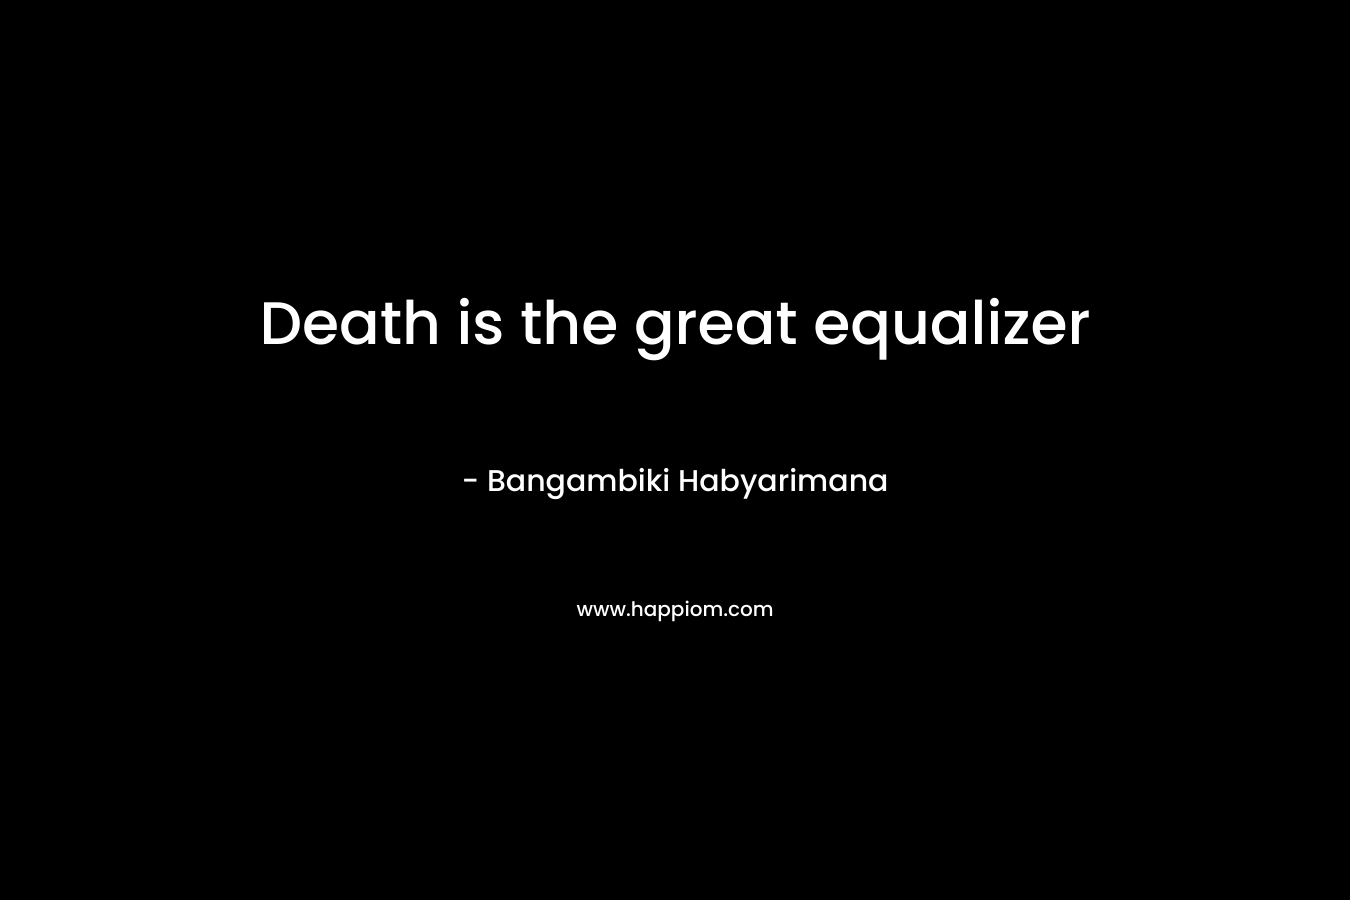 Death is the great equalizer